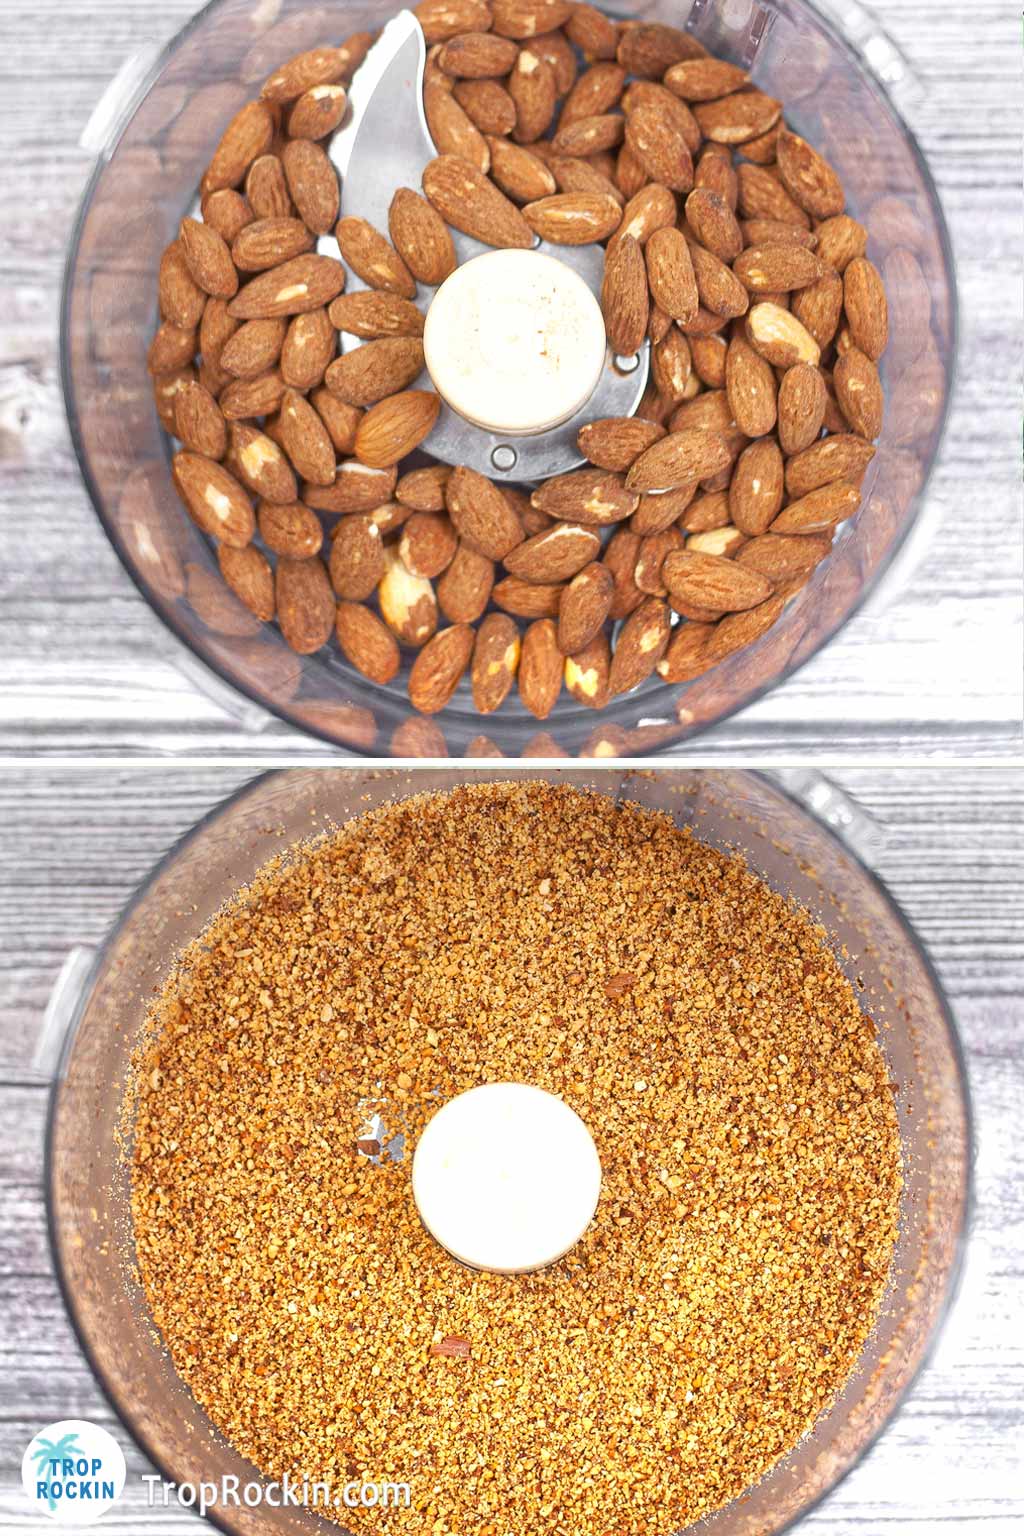 Top photo of whole almonds in the food processor, bottom photo is almond crumbs in the food processor.